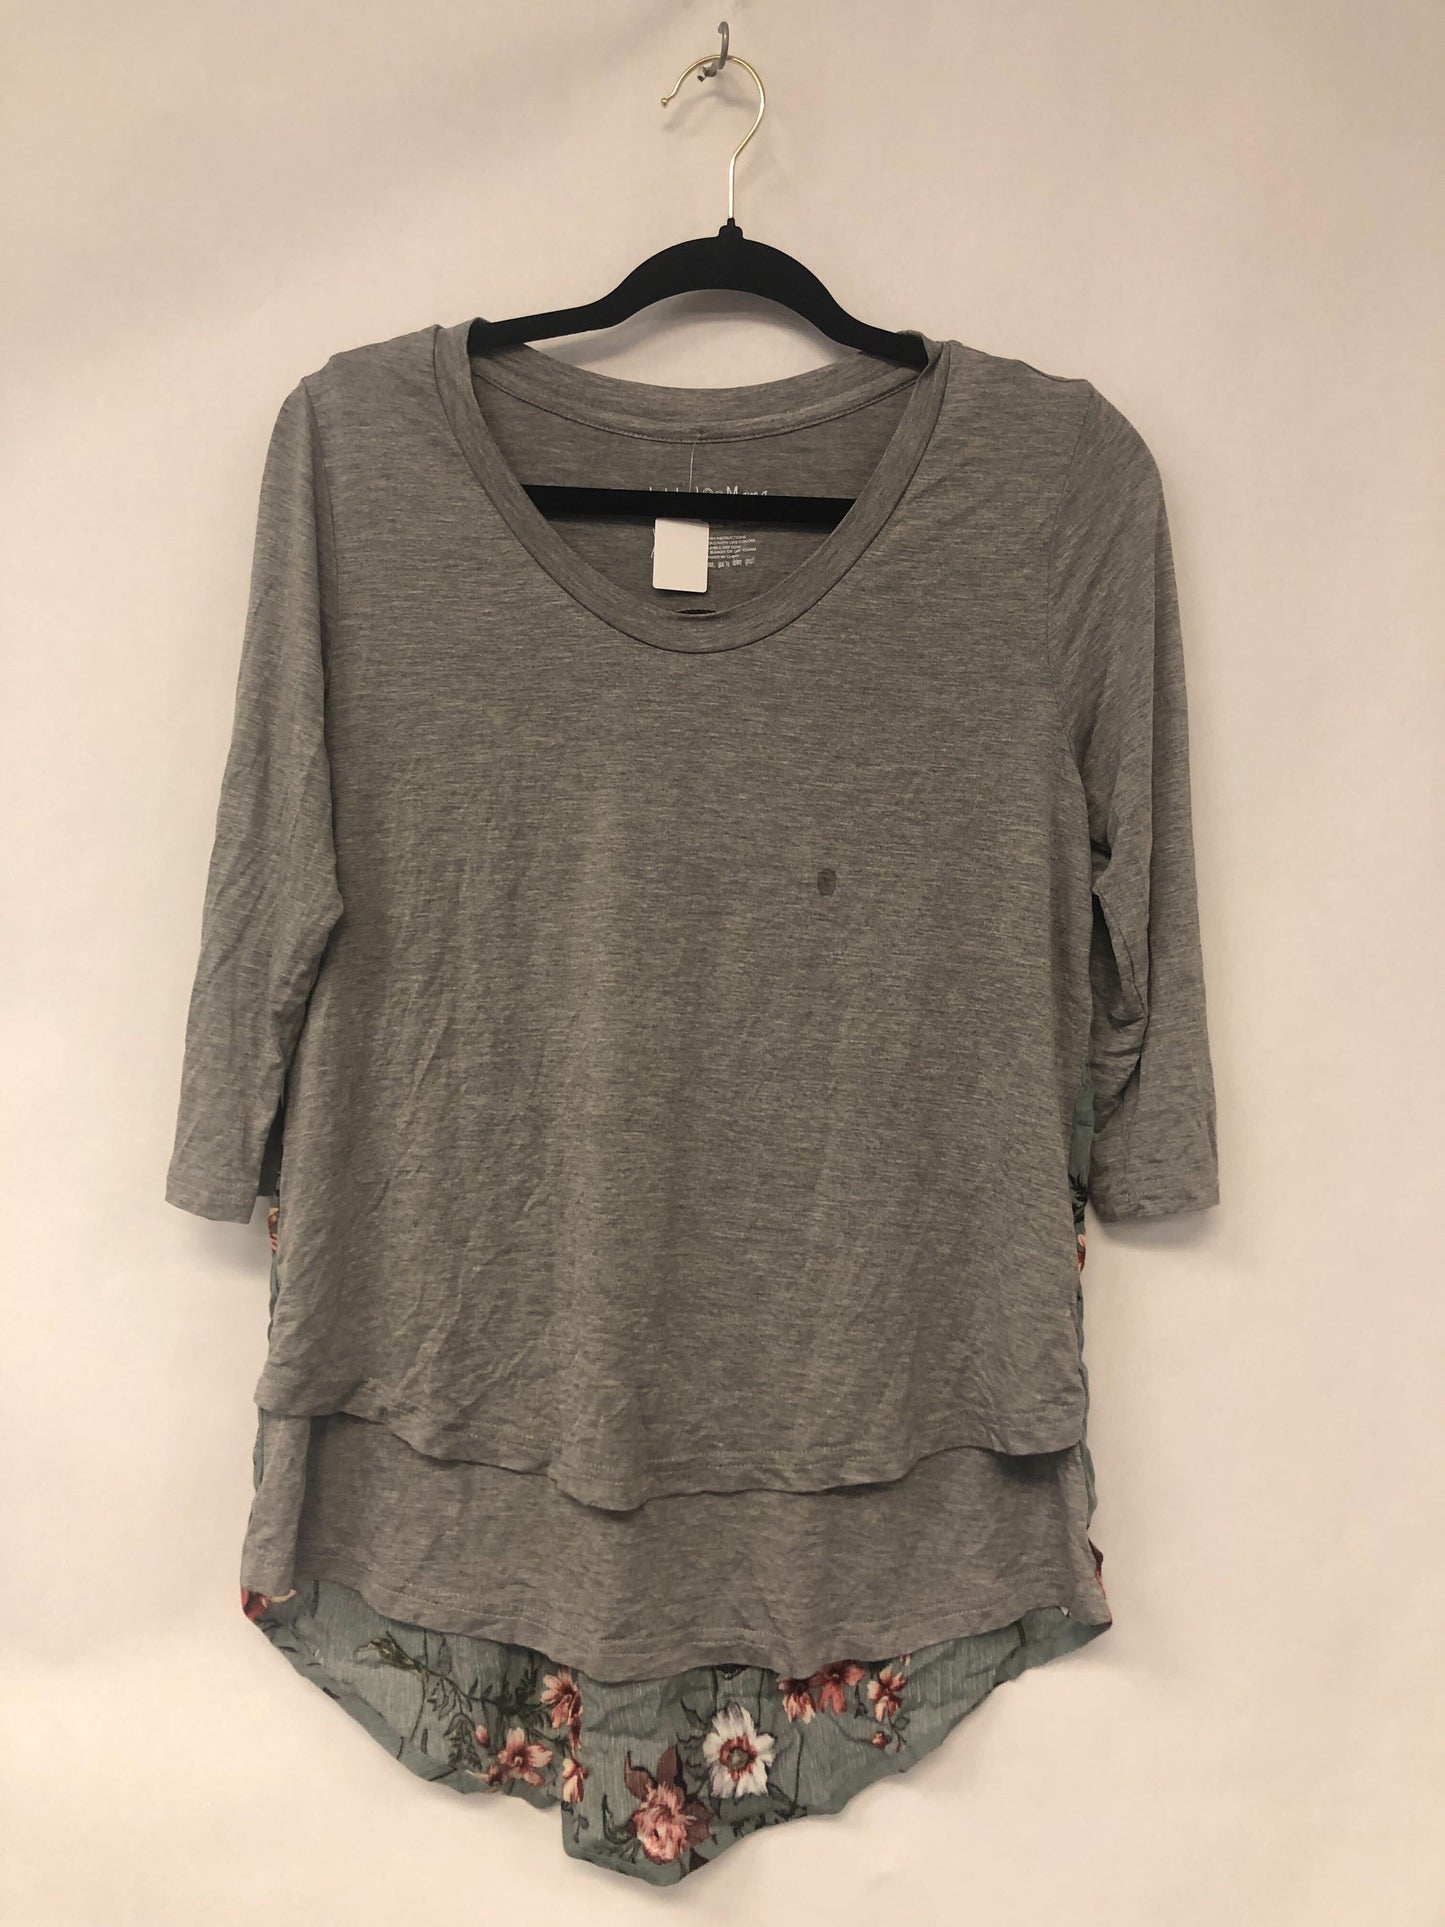 Outlet 6211 - Latched Mama 3/4 Sleeve Scoop Neck Woven Back Nursing Top - Heather Grey/Teal - Extra Small